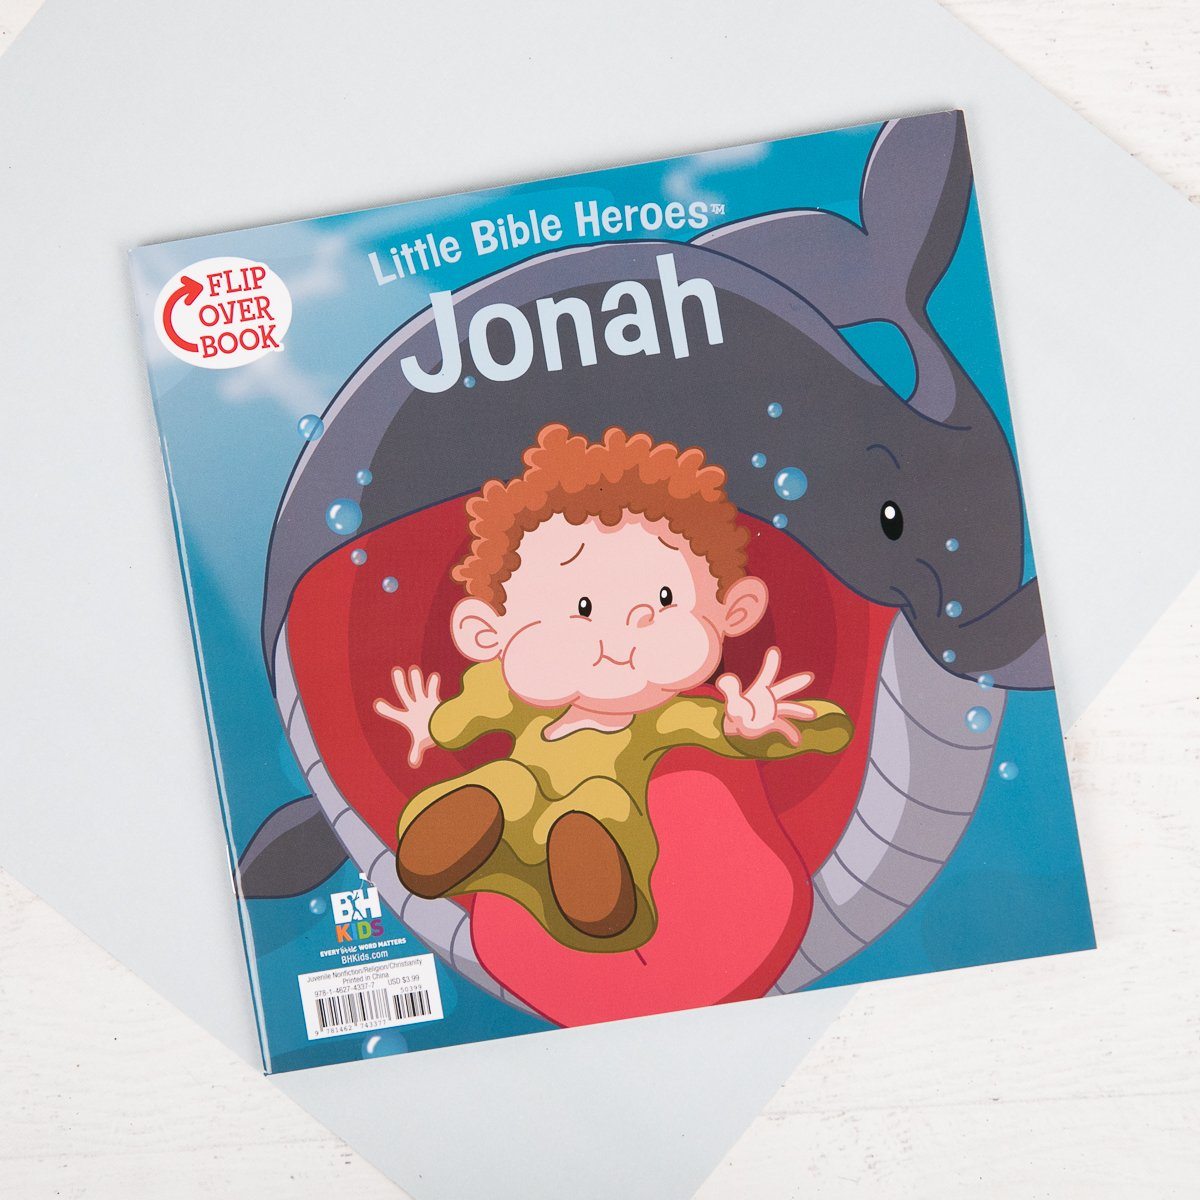 HelloBible Junior (ages 3-5) - Story of JONAH